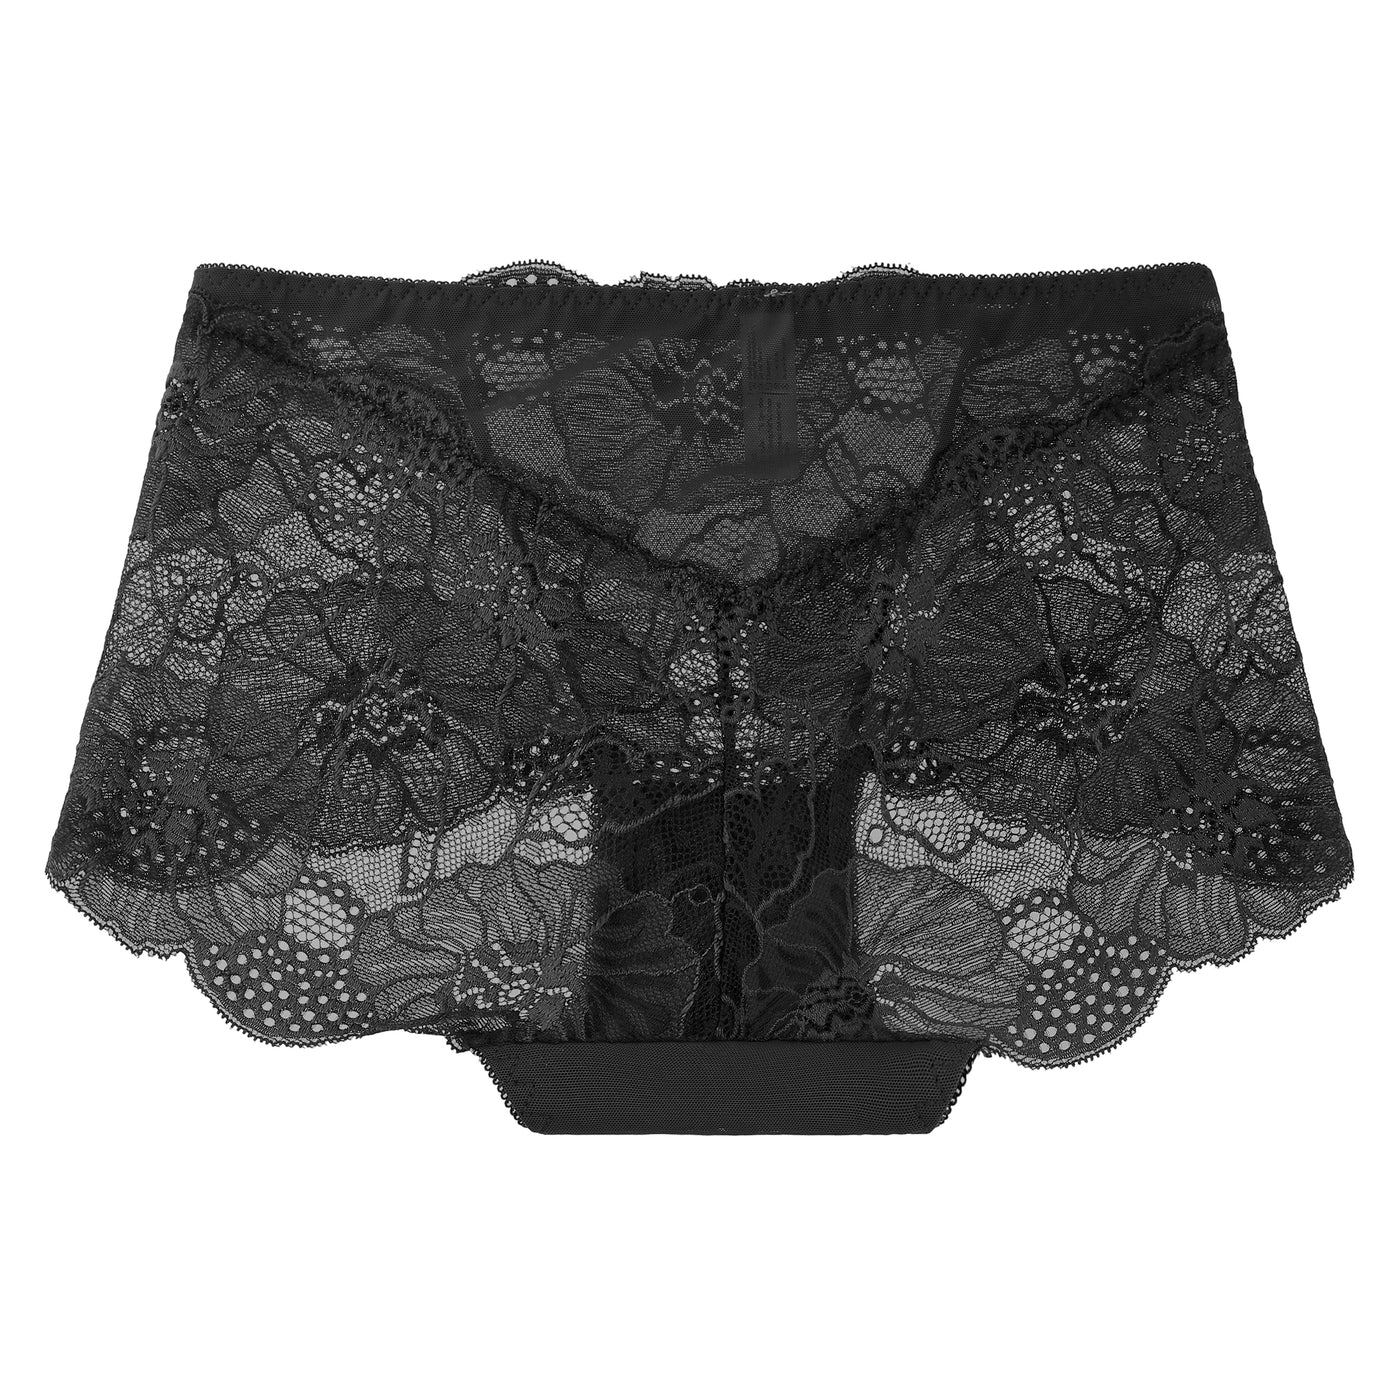 Bublédon Panties for Women Sexy Lace Floral Underwear Briefs Hipster Panty